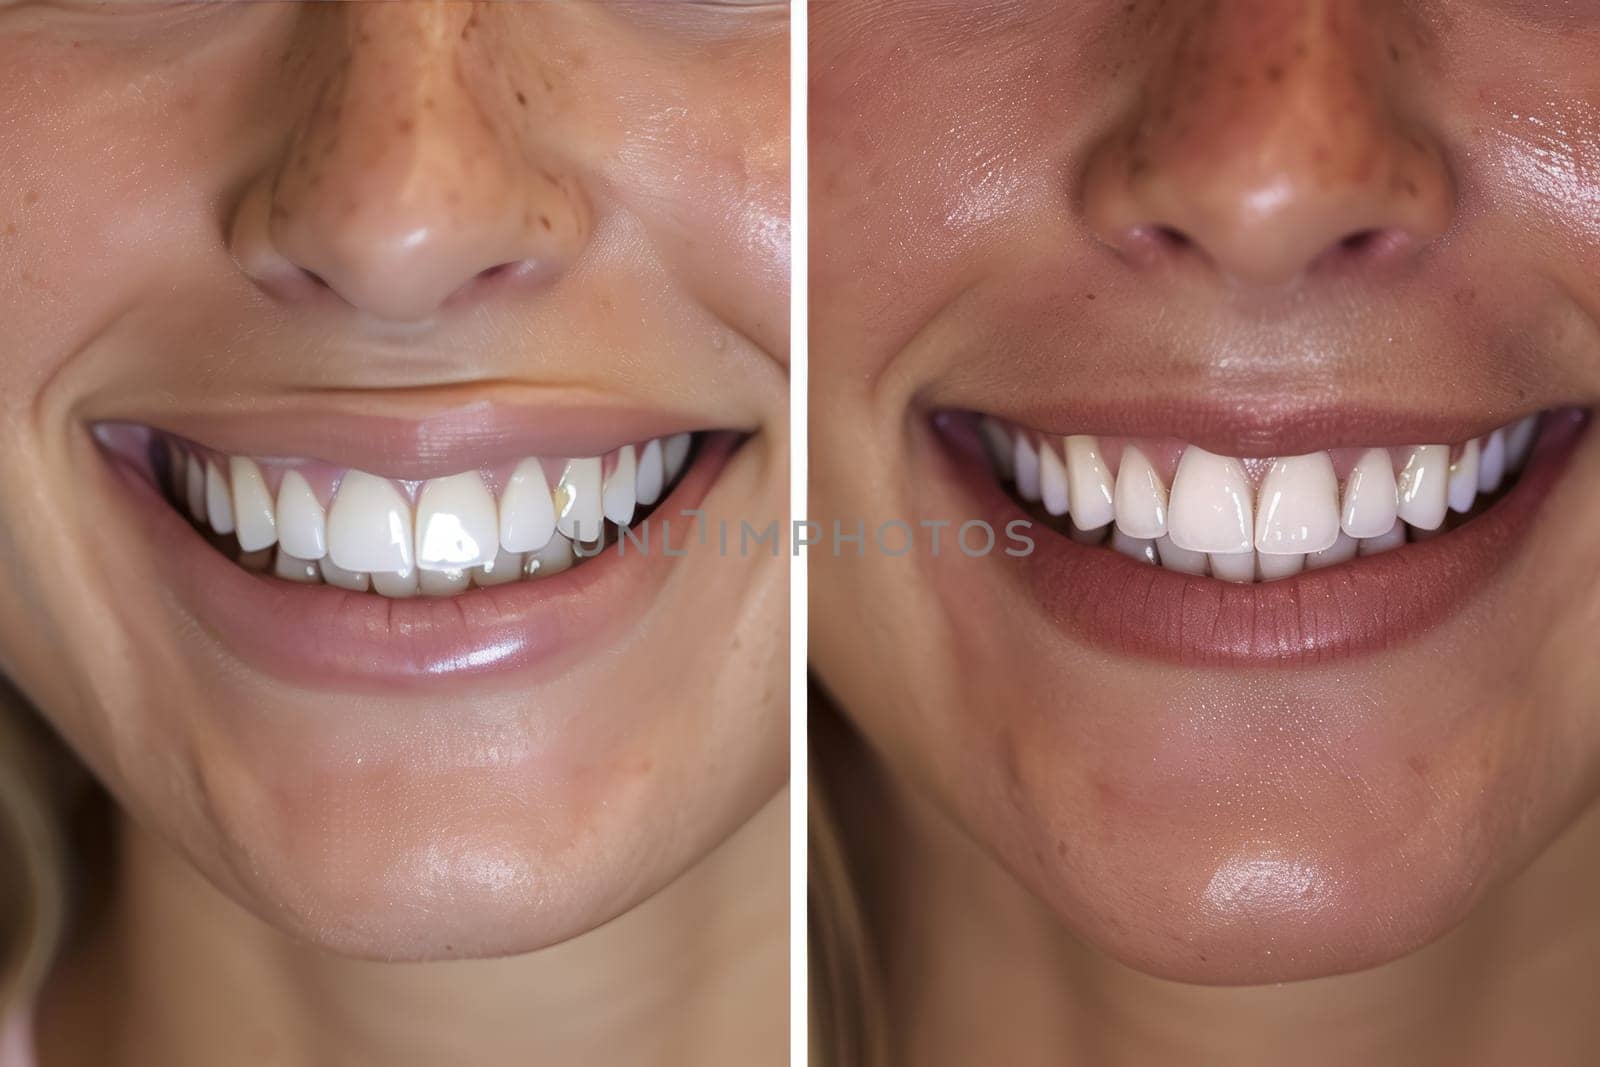 A split-screen depiction of a dental transformation with uneven, discolored teeth on one side and a perfect, white smile on the other